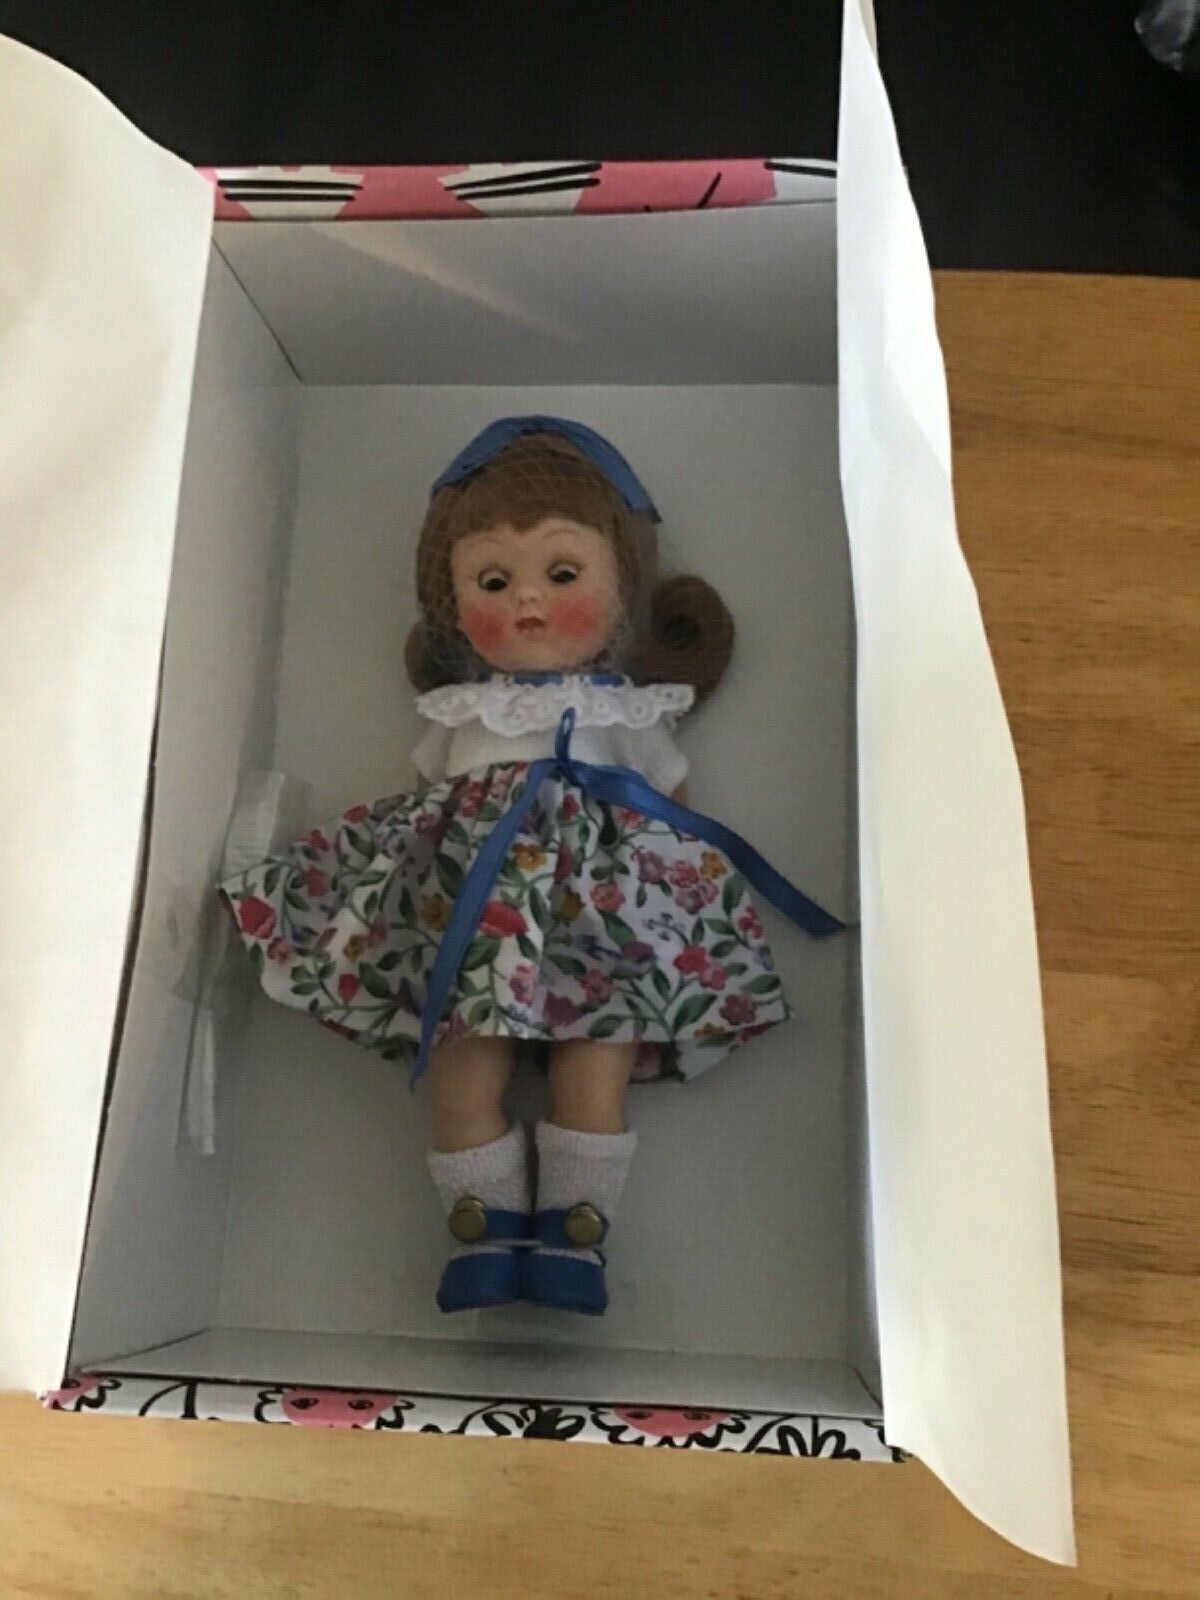 Complete Free Shipping Hi I’m Houston Mall Ginny Vogue Afternoon Kindergarten Linda Doll